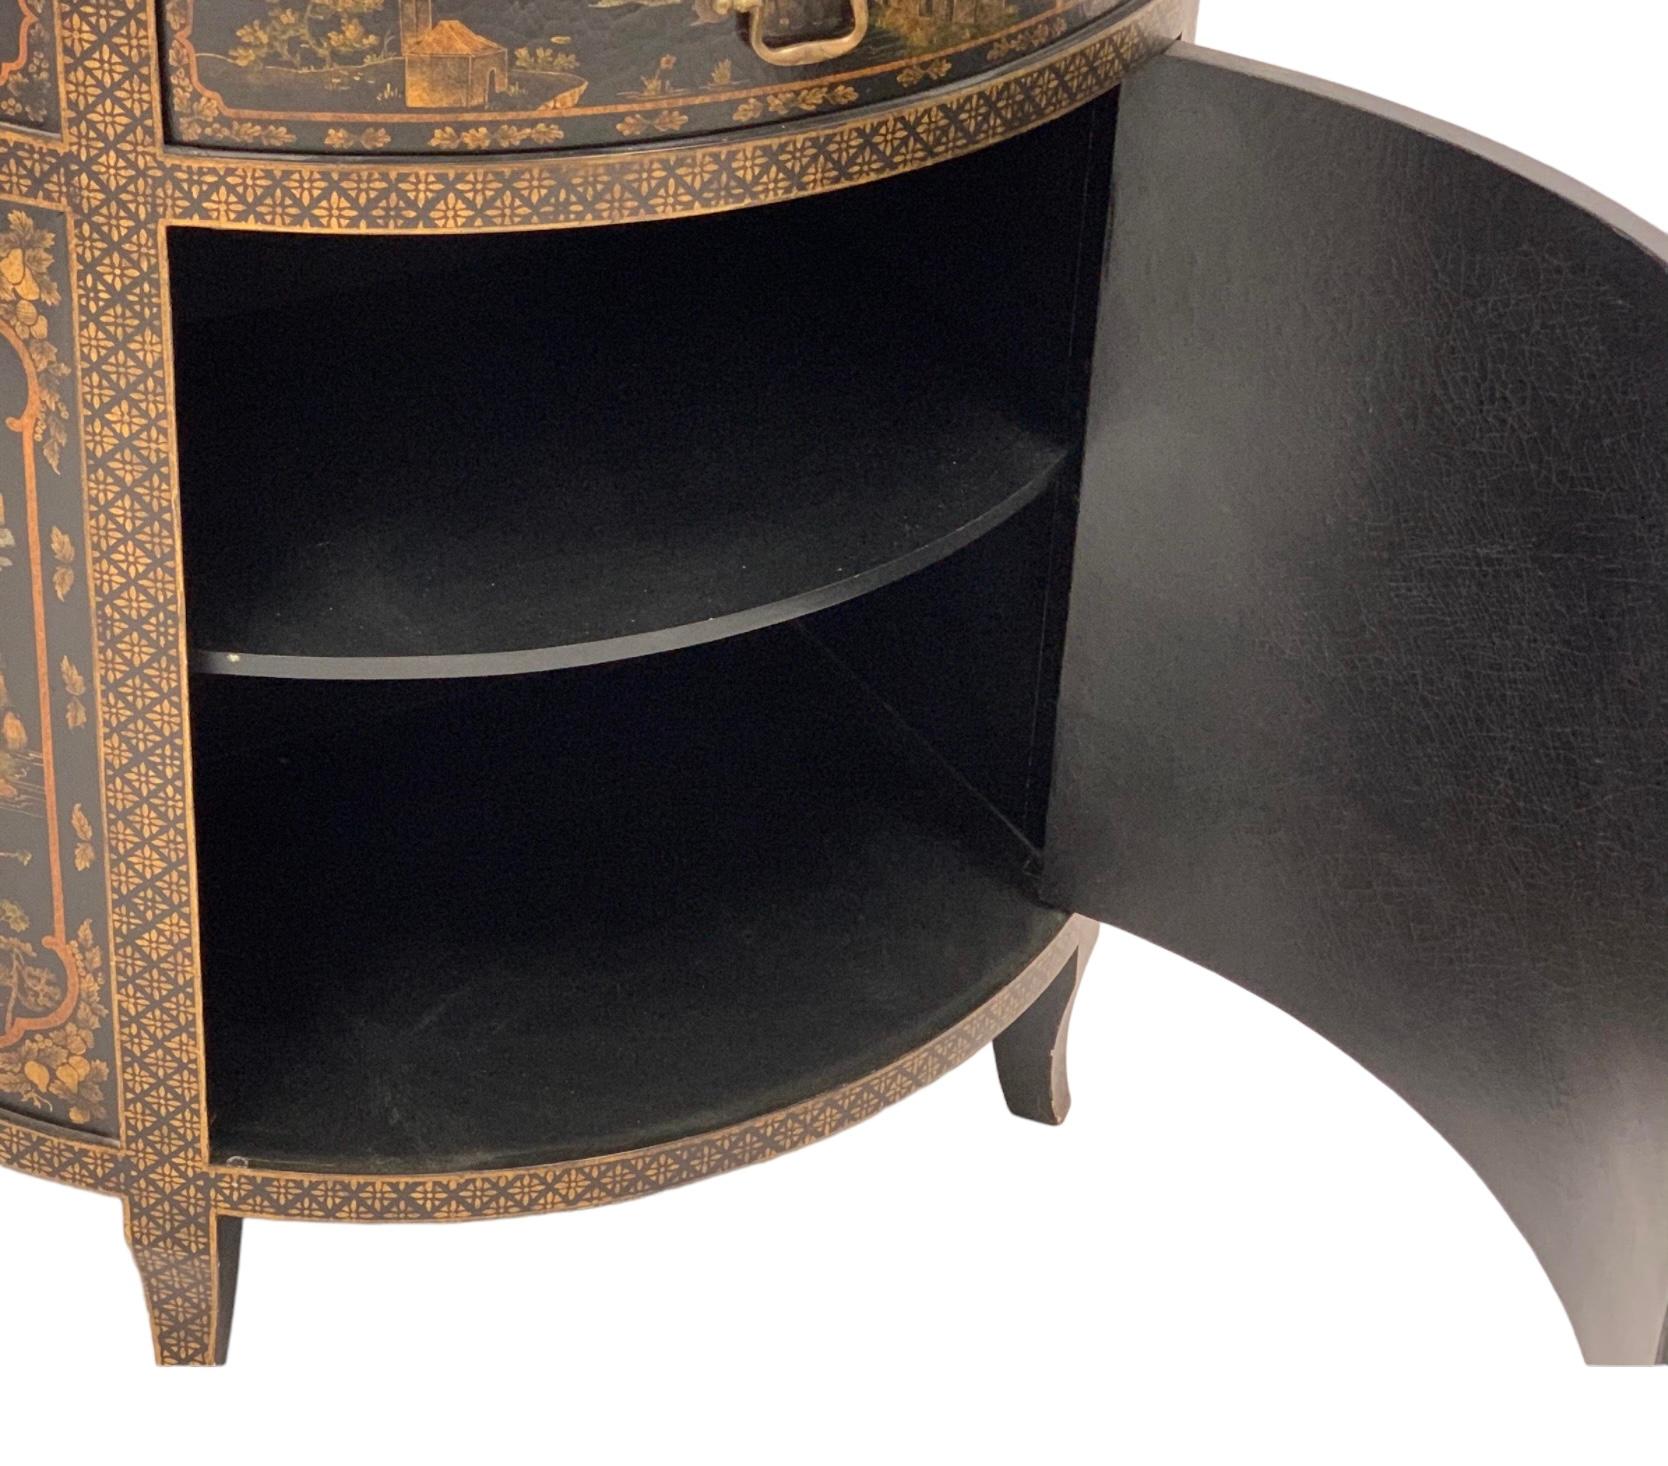 Regency Italian Chinoiserie Black Lacquer & Gilt Demilune Cabinet By Decorative Crafts